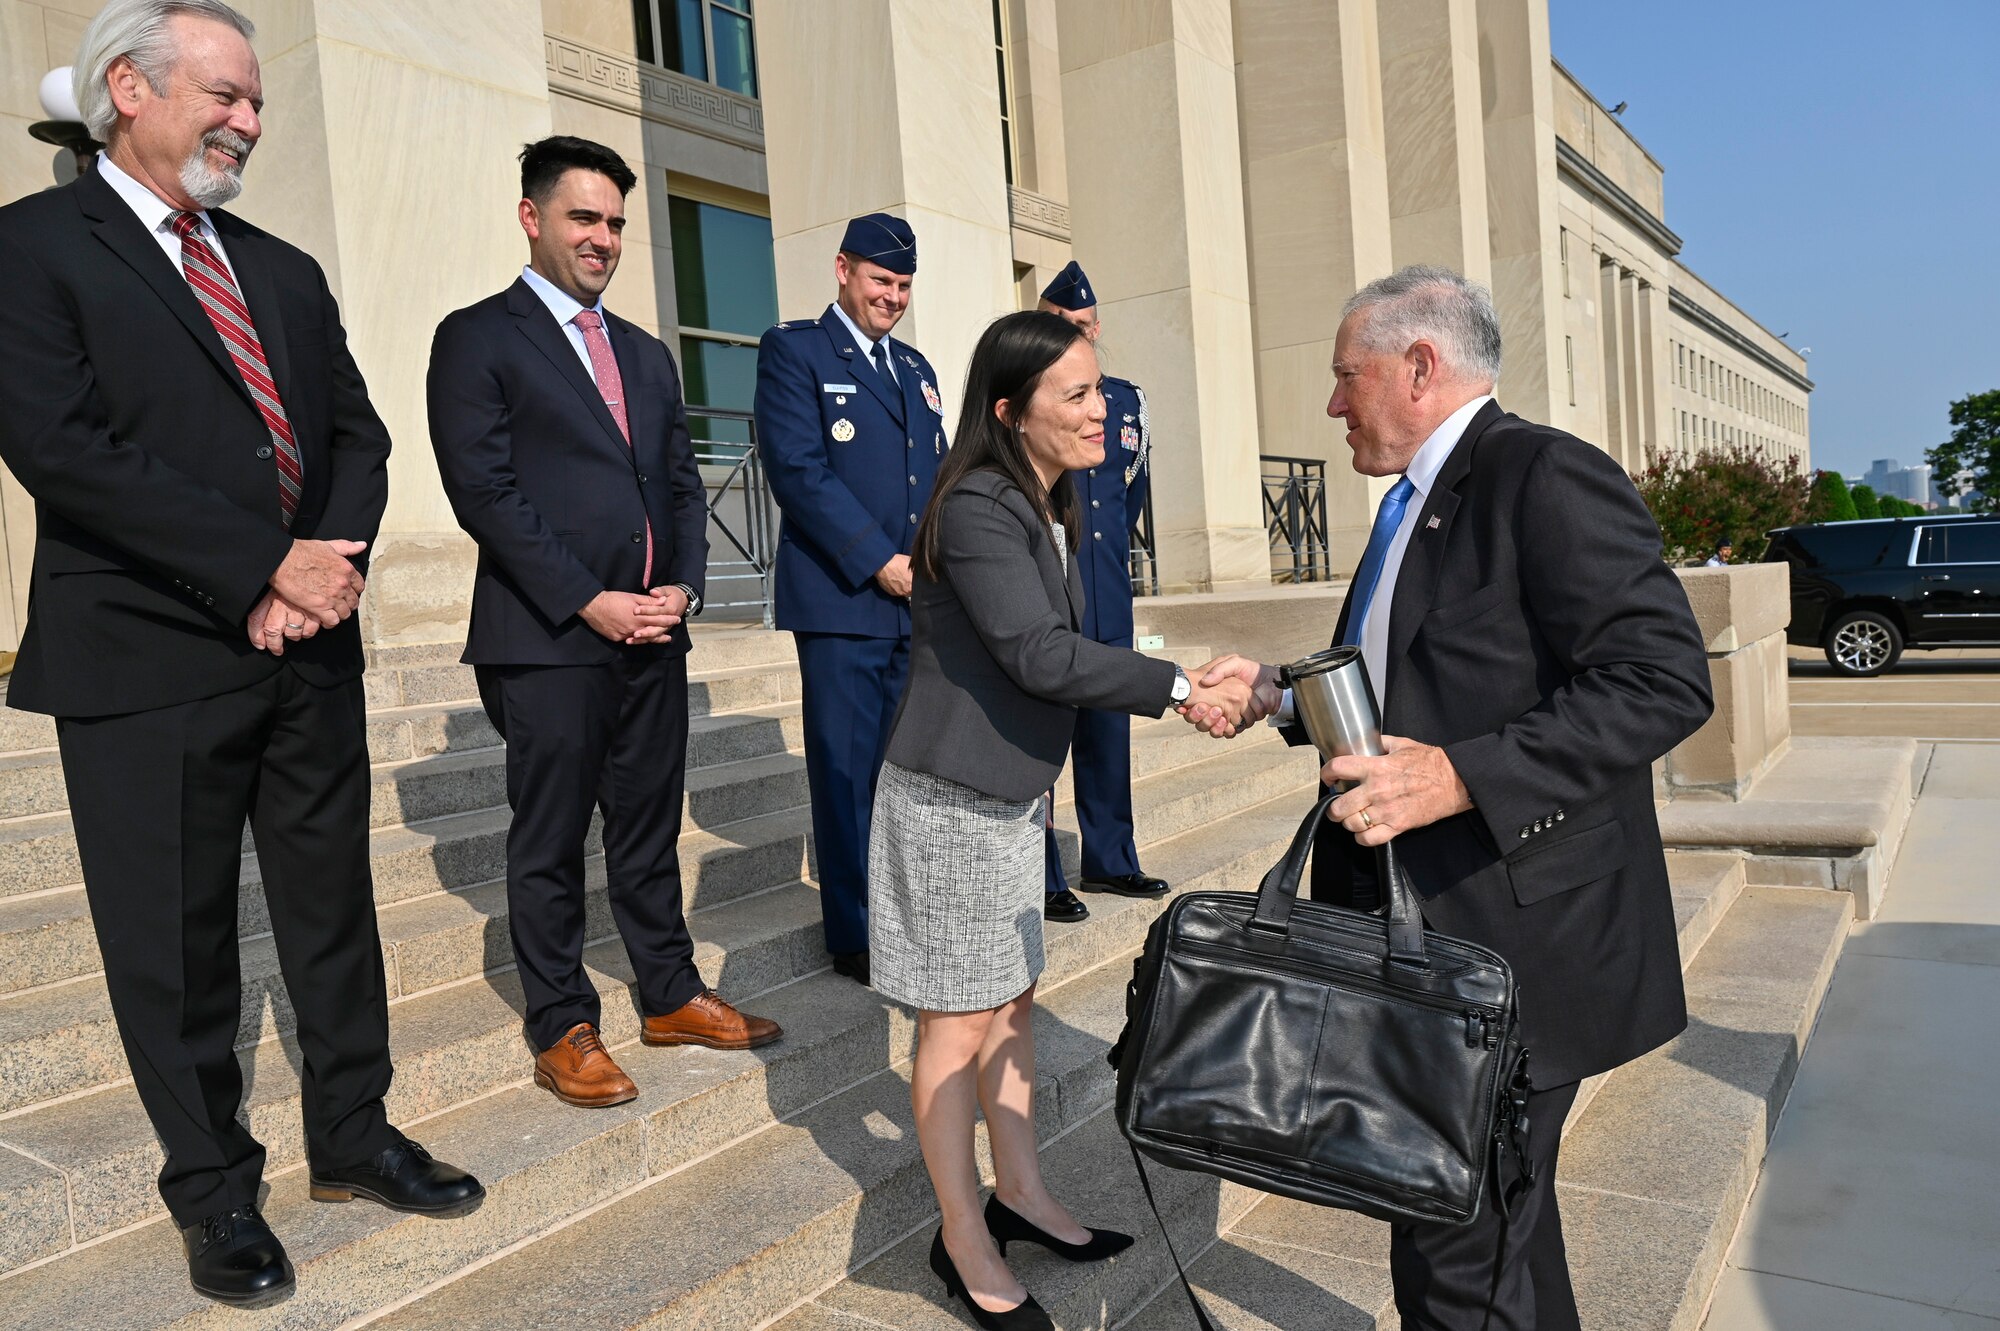 Secretary of the Air Force Frank Kendall shakes hands with Under Secretary of the Air Force Gina Ortiz Jones on arrival for his first day at the Pentagon, Arlington, Va., July 28, 2021. (U.S. Air Force photo by Eric Dietrich)